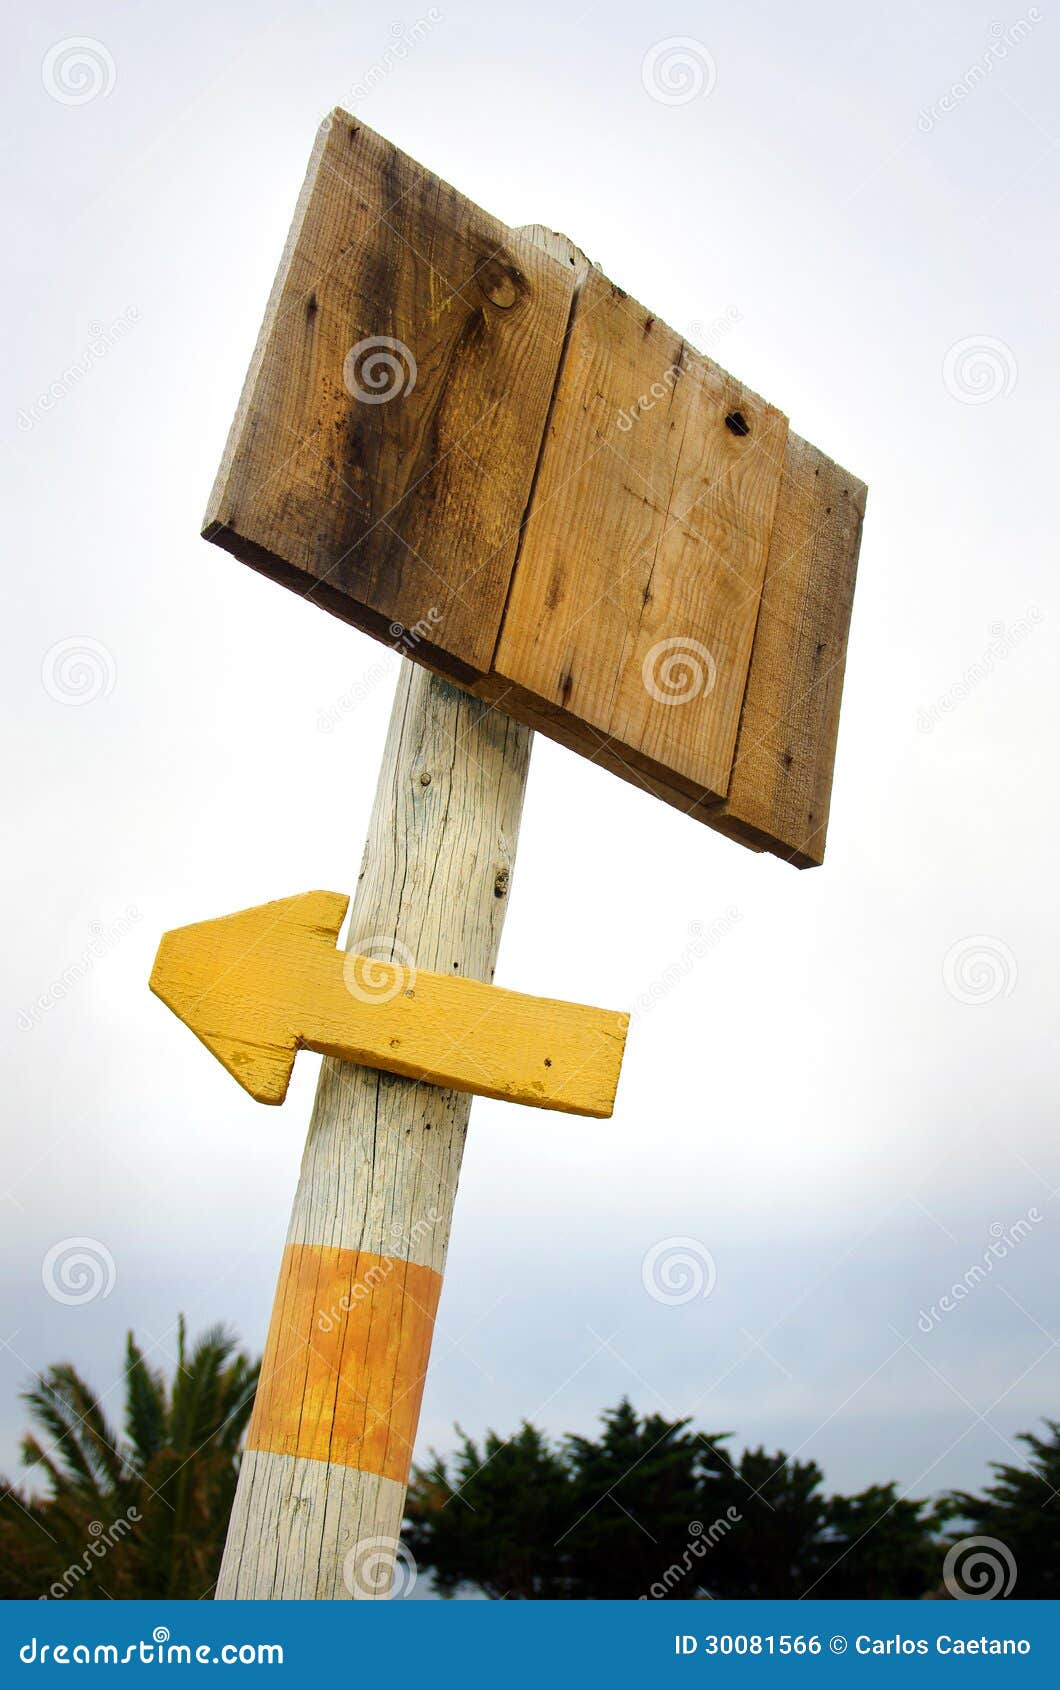 Wooden placard a arrow stock photo. Image of object 